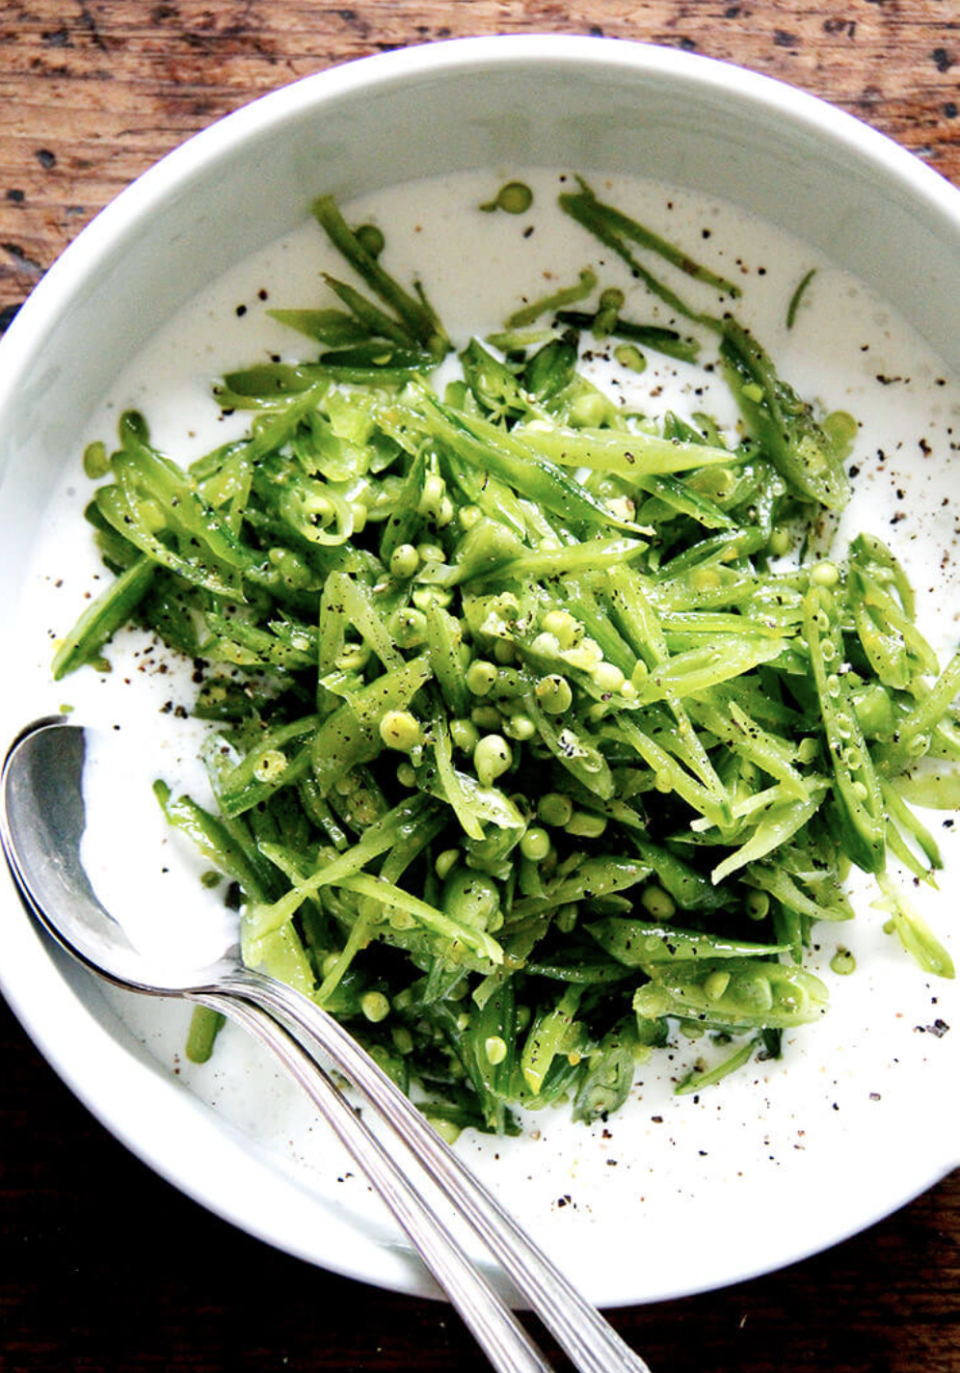 This burst of bright green will remind you why snap peas deserve a spot on your grocery list again.Recipe: Snap Pea Salad With Buttermilk Dressing